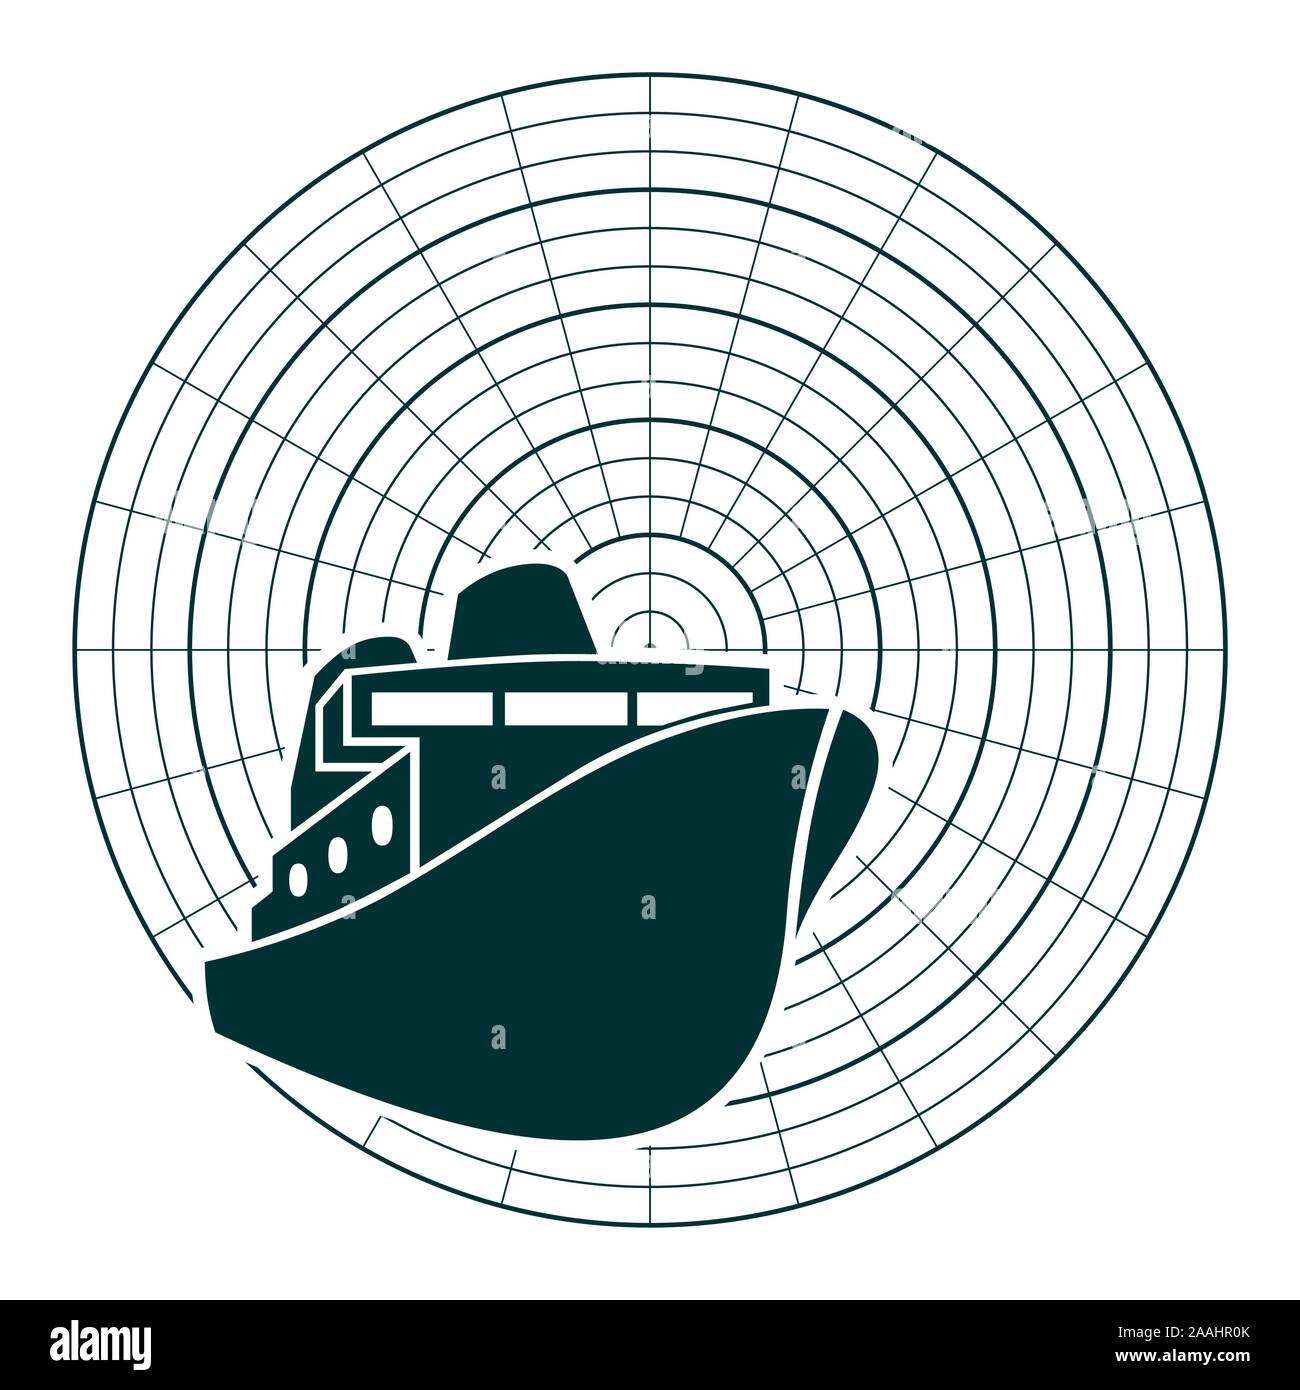 Ferry boat icon in thin line style on radar display. Stock Vector